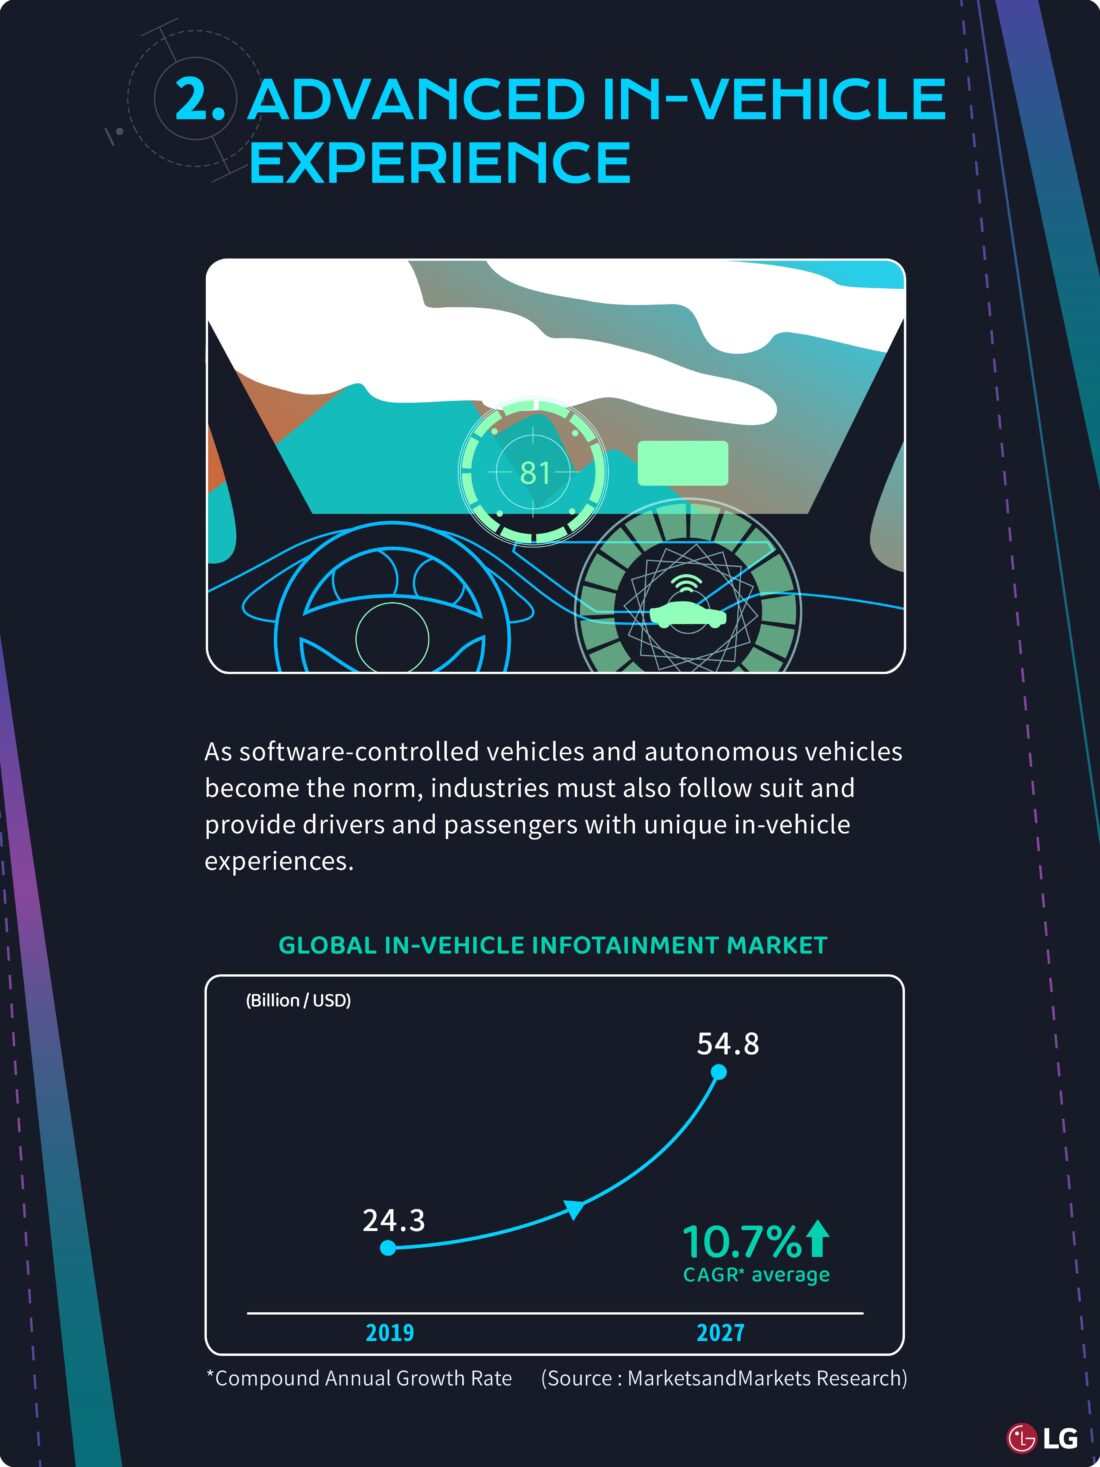 The page explaining the importance of in-vehicle experiences through an illustration of an infotainment system and a market projection graph.